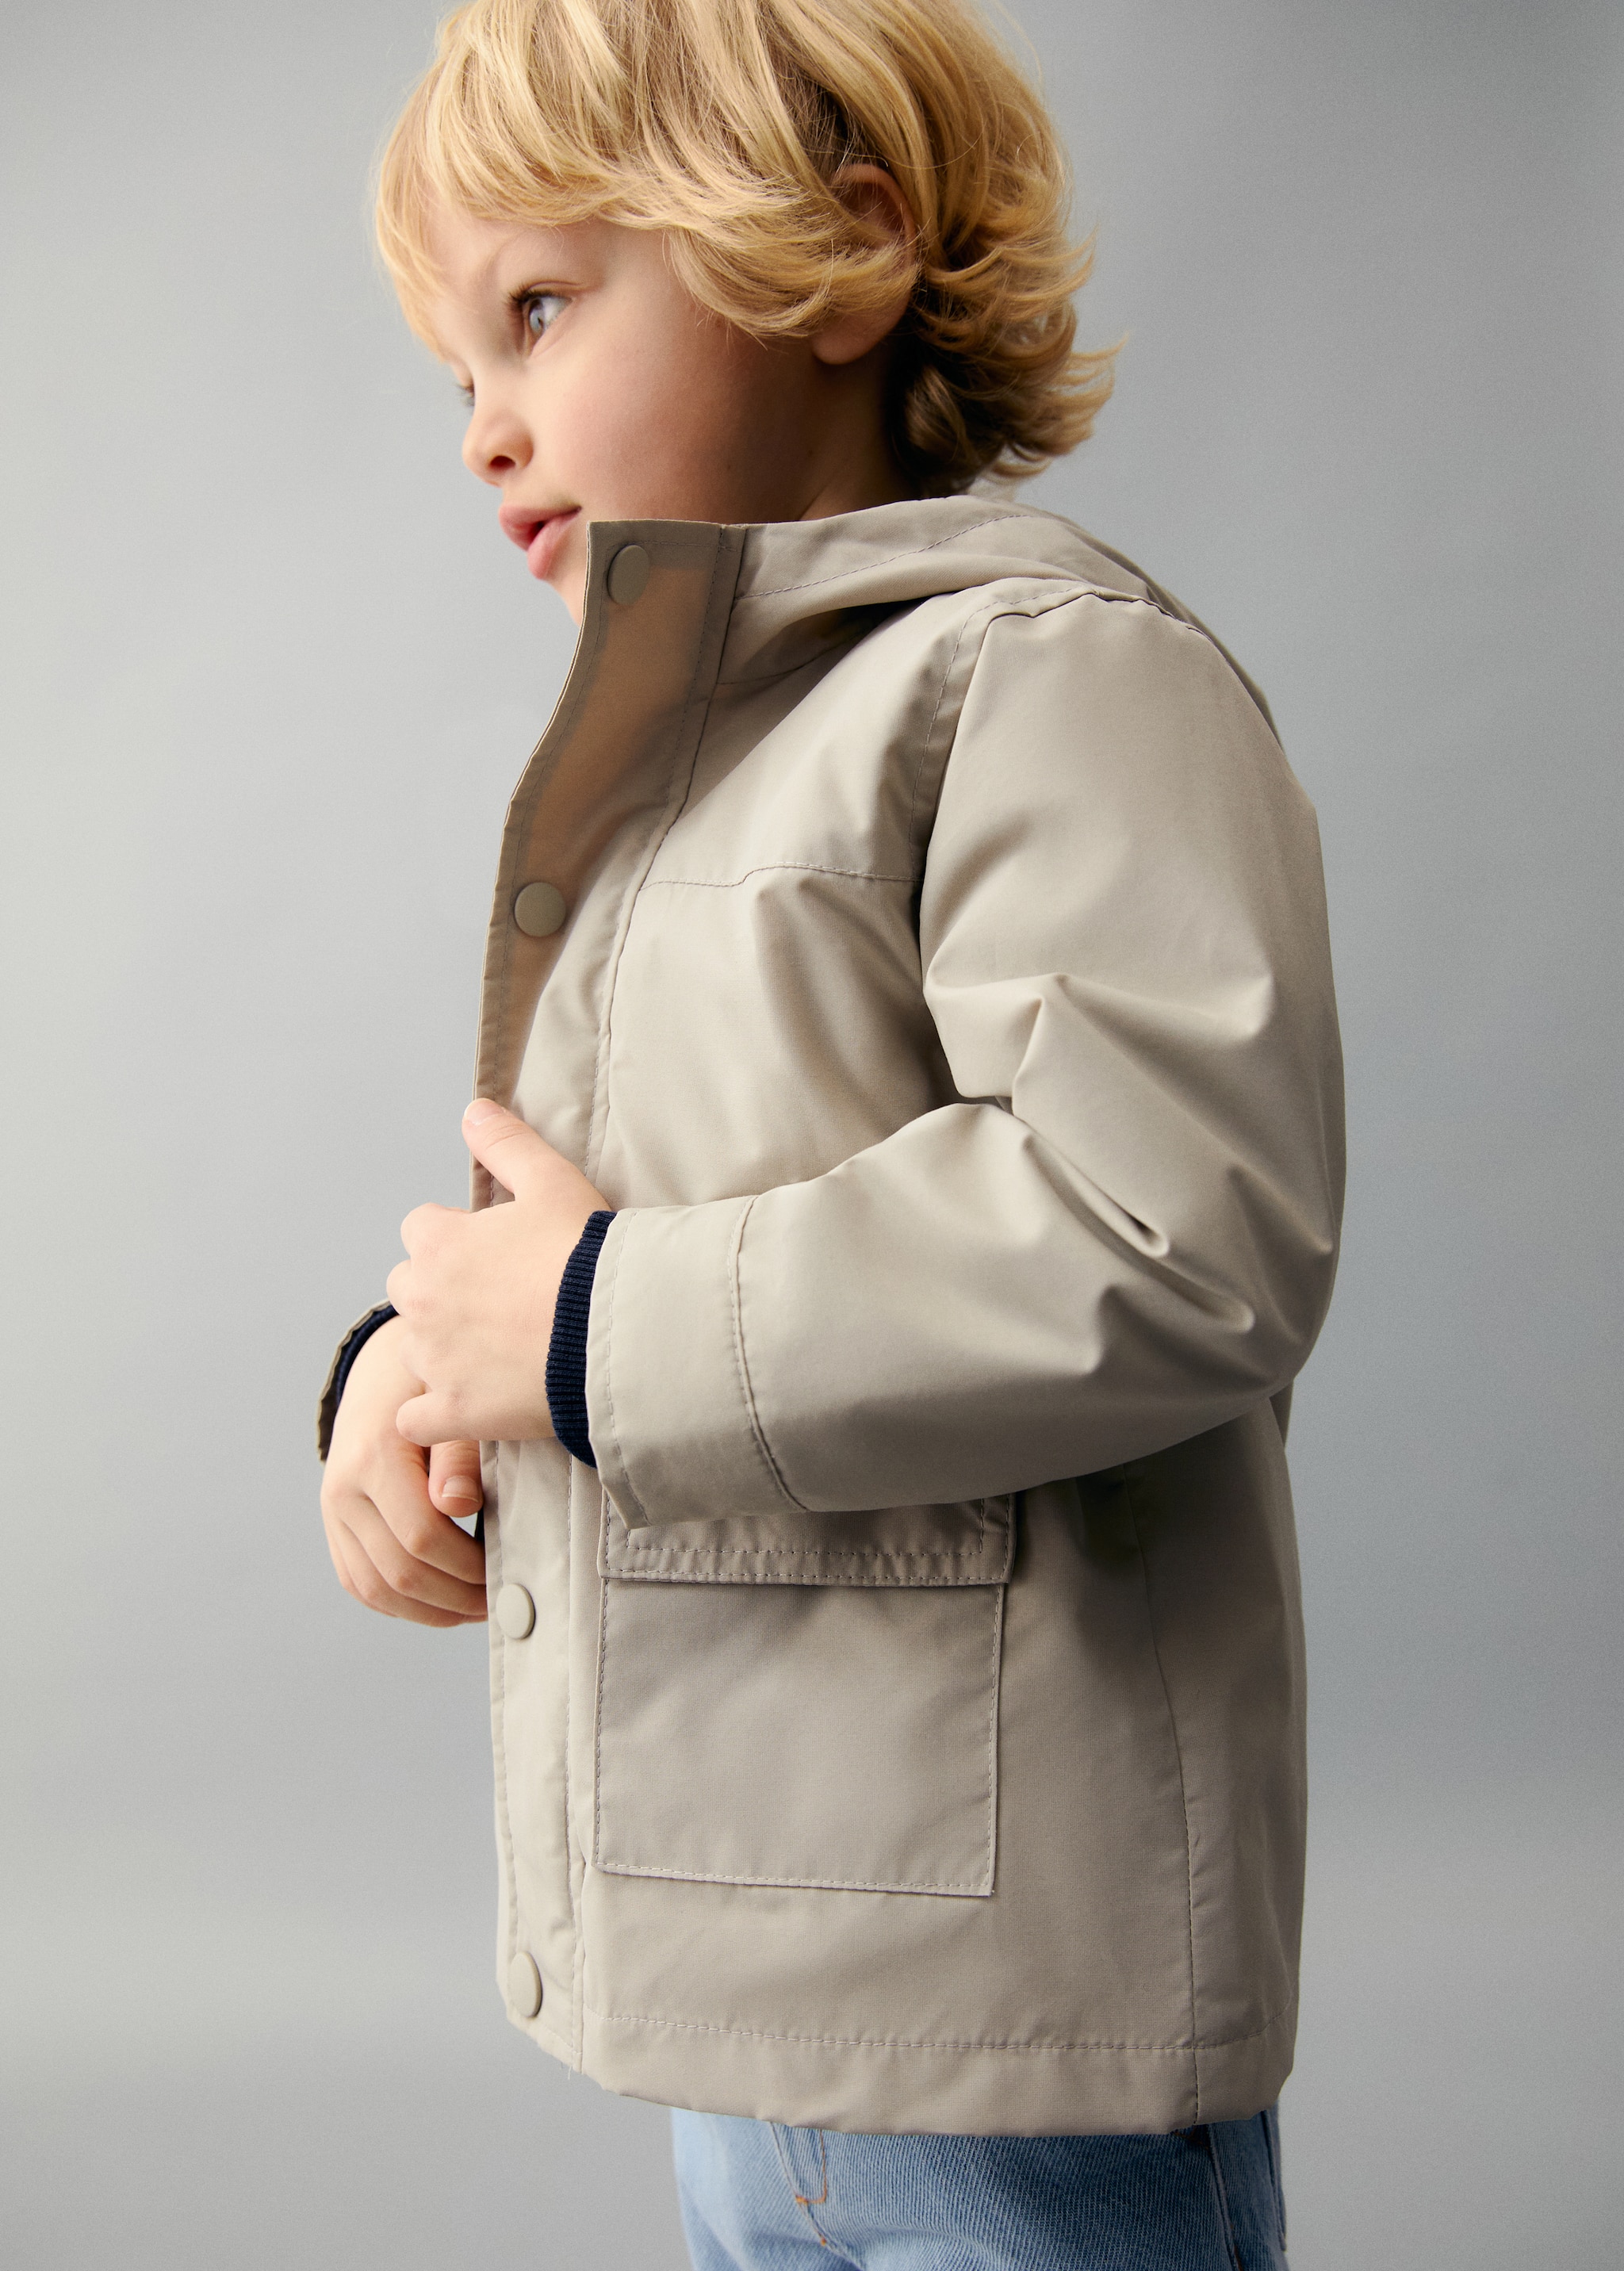 Hooded parka with pocket - Details of the article 1